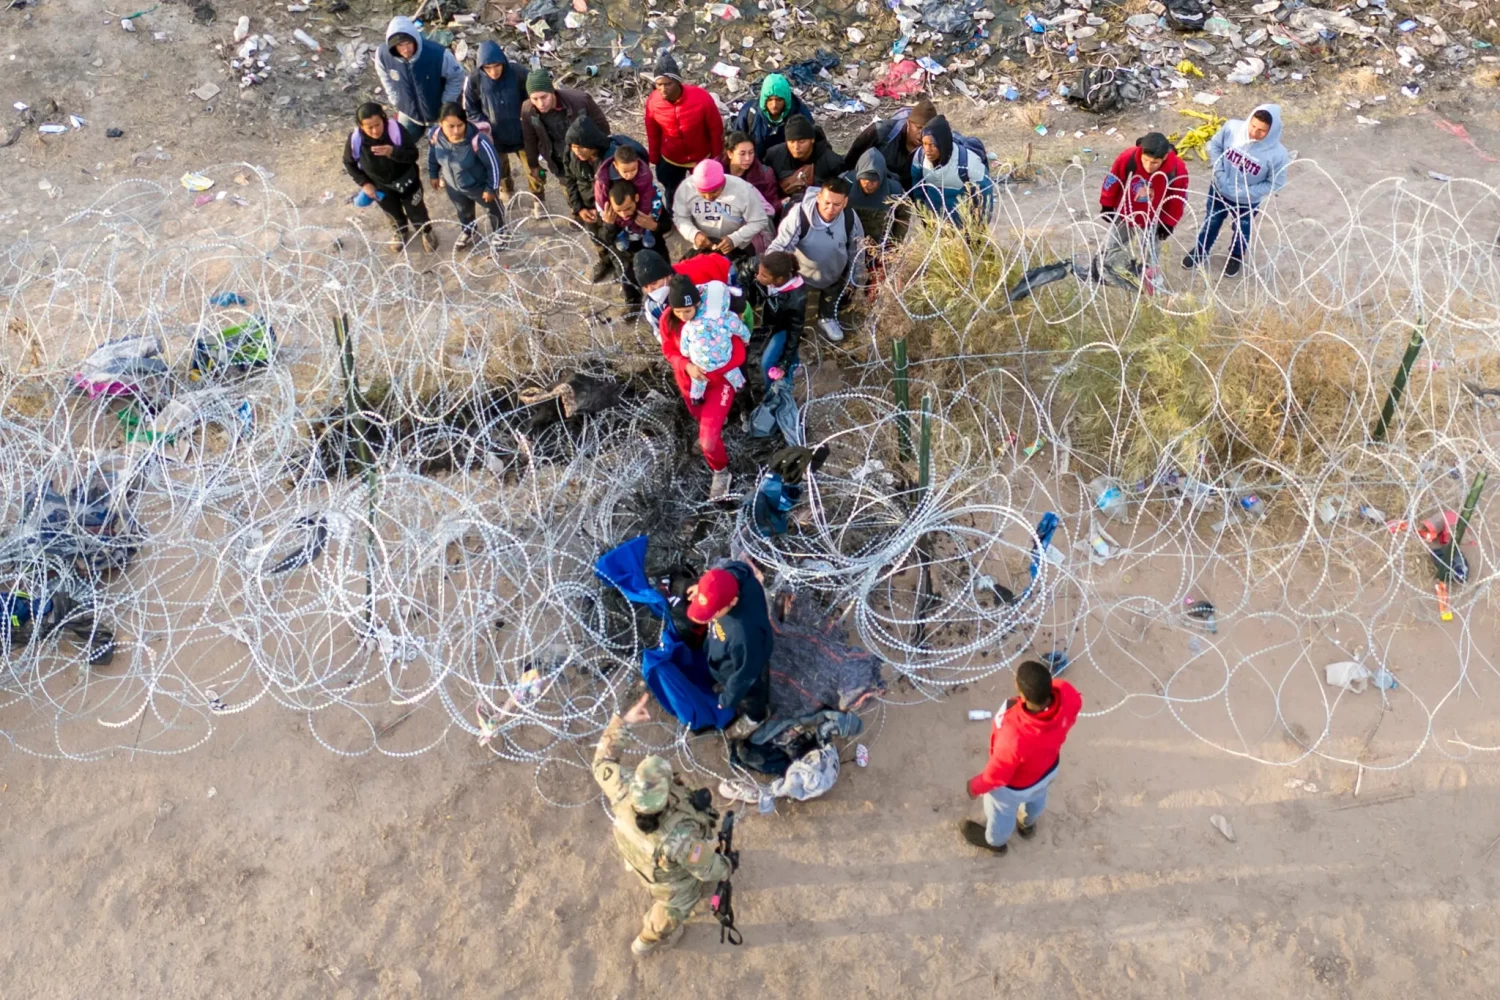 Nearly 2.5 million people crossed the southern border last year.Credit...John Moore/Getty Images